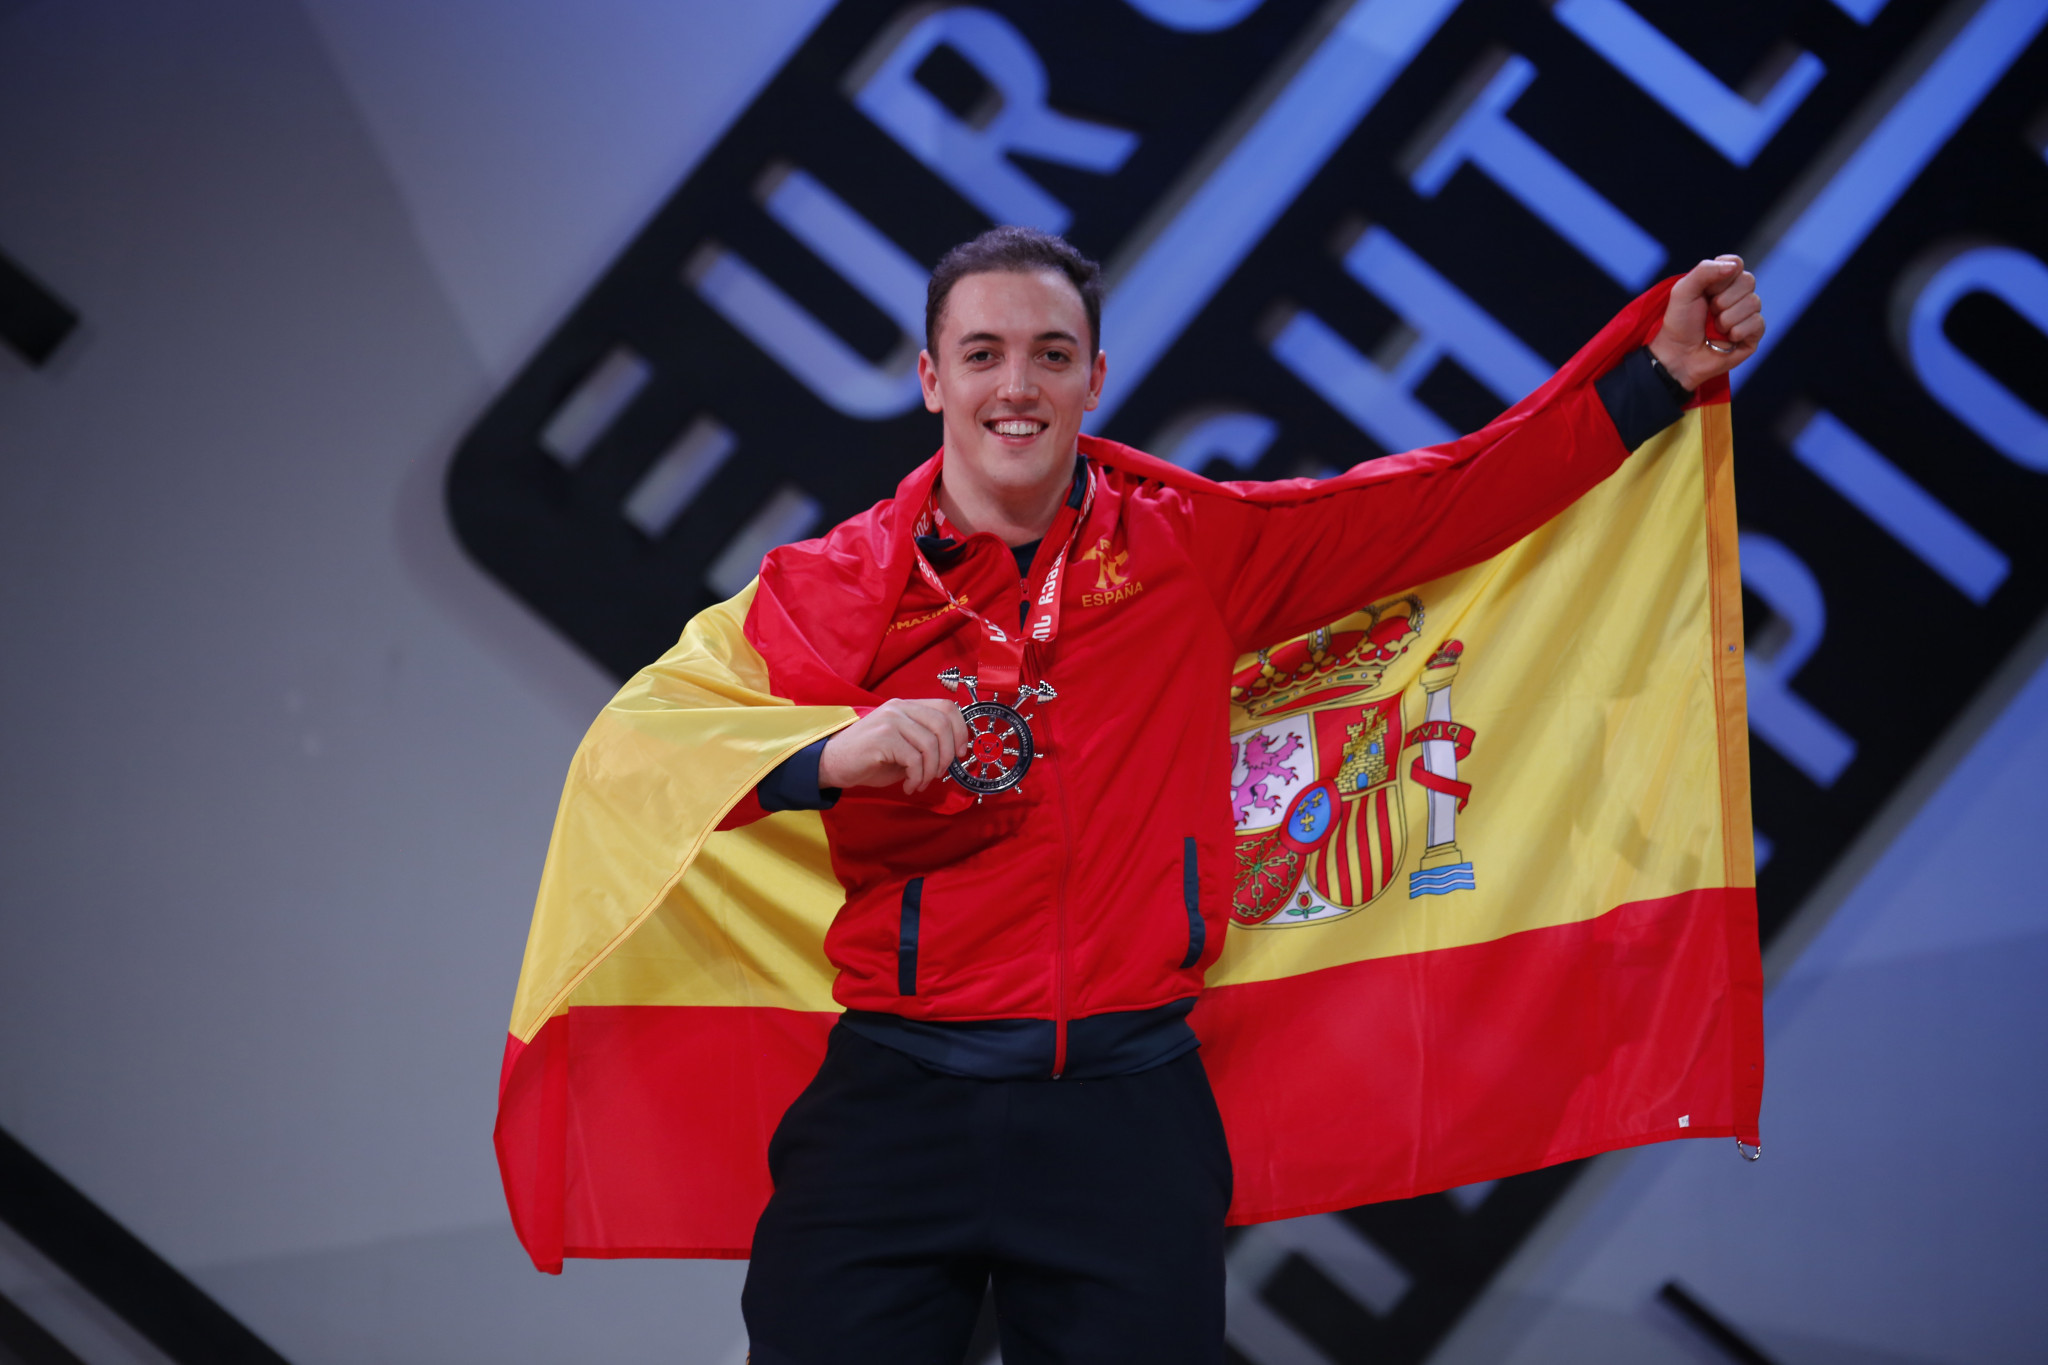 Spain's Andres Mata won a silver medal in the men's 81kg snatch, despite being in Group B ©FEH